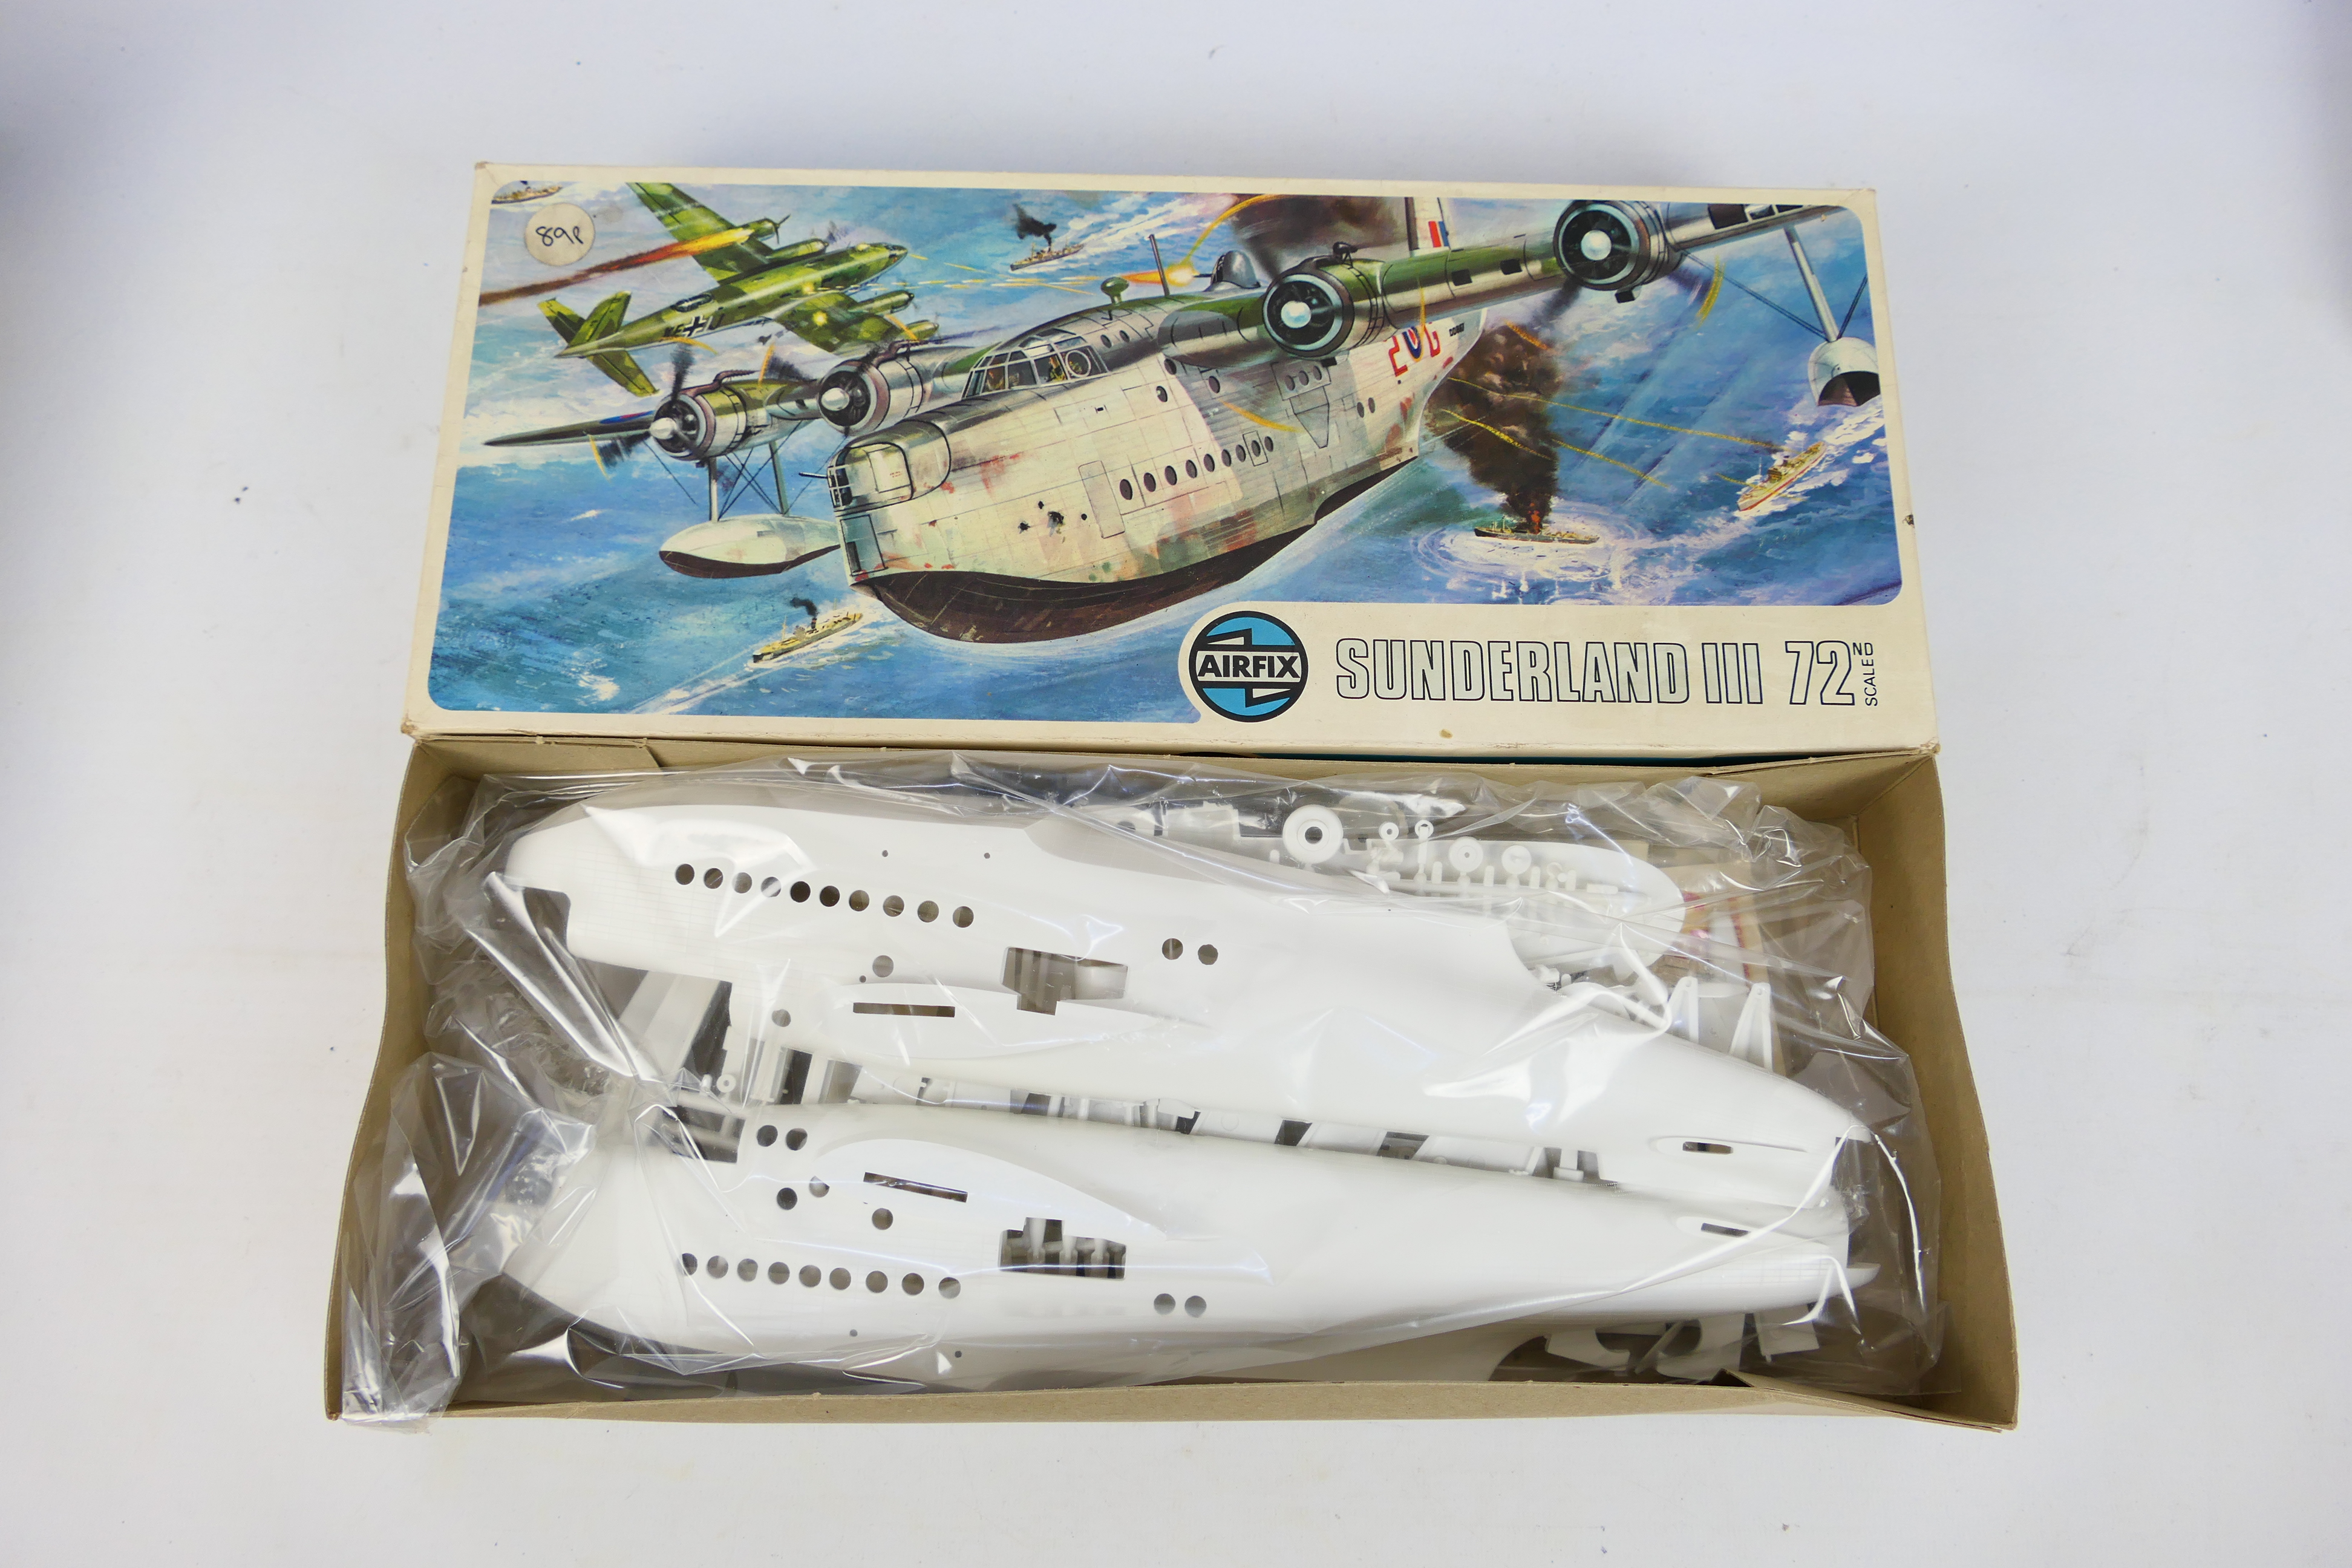 Airfix - Revell - Matchbox - 4 x vintage model kits including Gemini space capsule in 1:24 scale # - Image 6 of 12